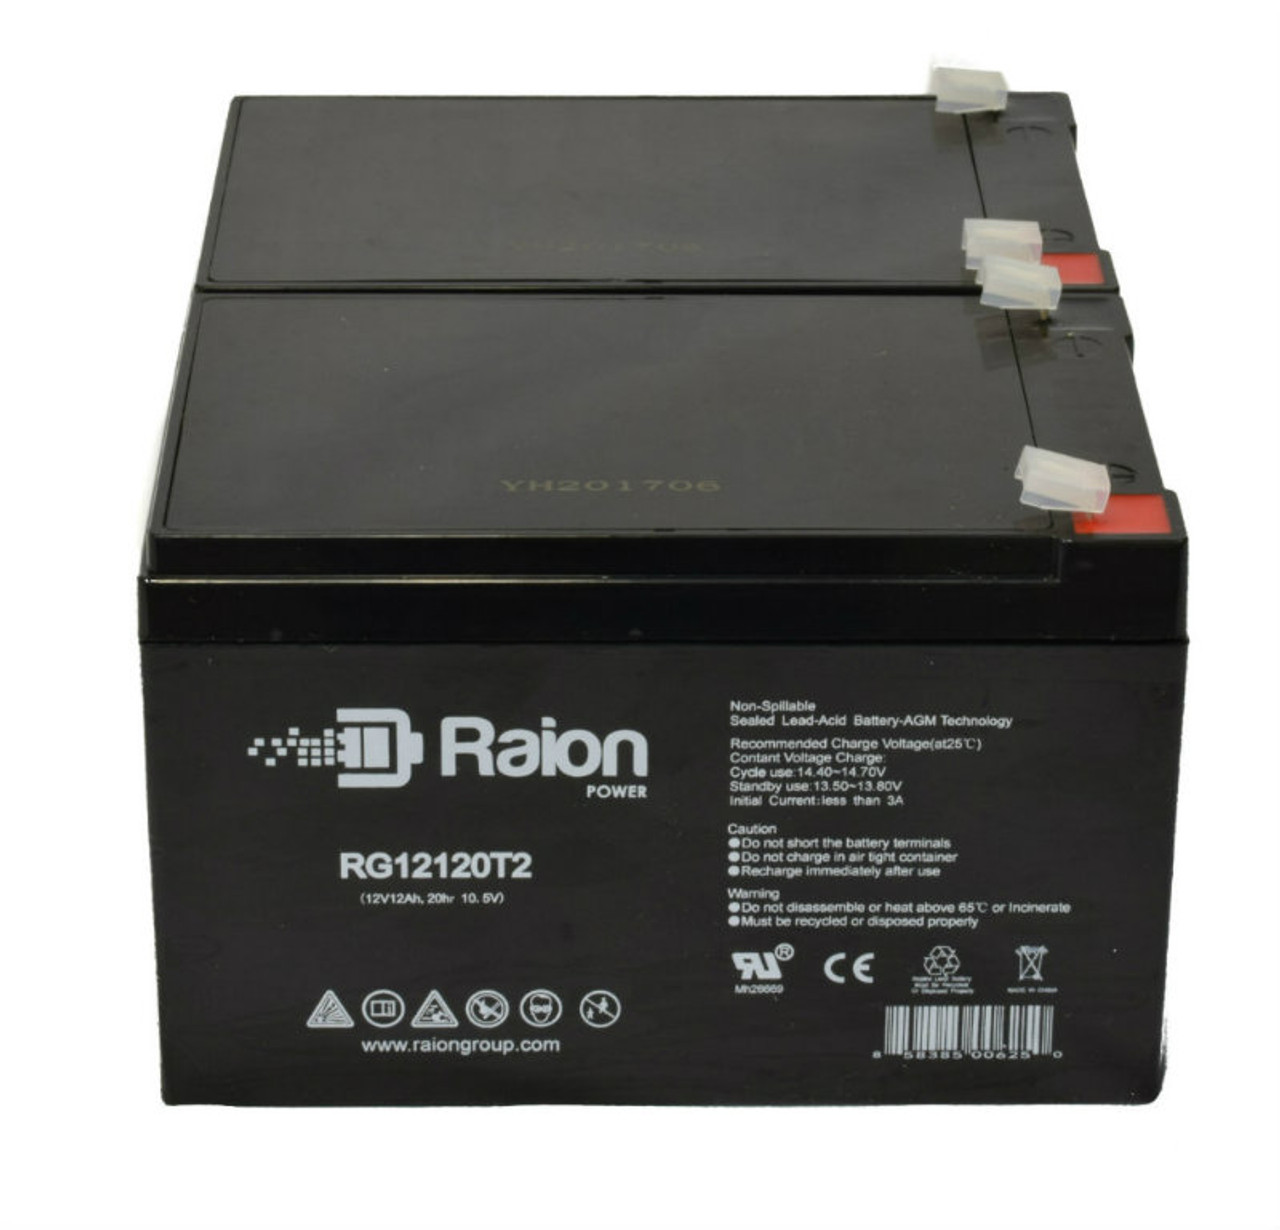 Raion Power 12V 12Ah Non-Spillable Compatible Replacement Battery for KIJO JS12-12 - (2 Pack)